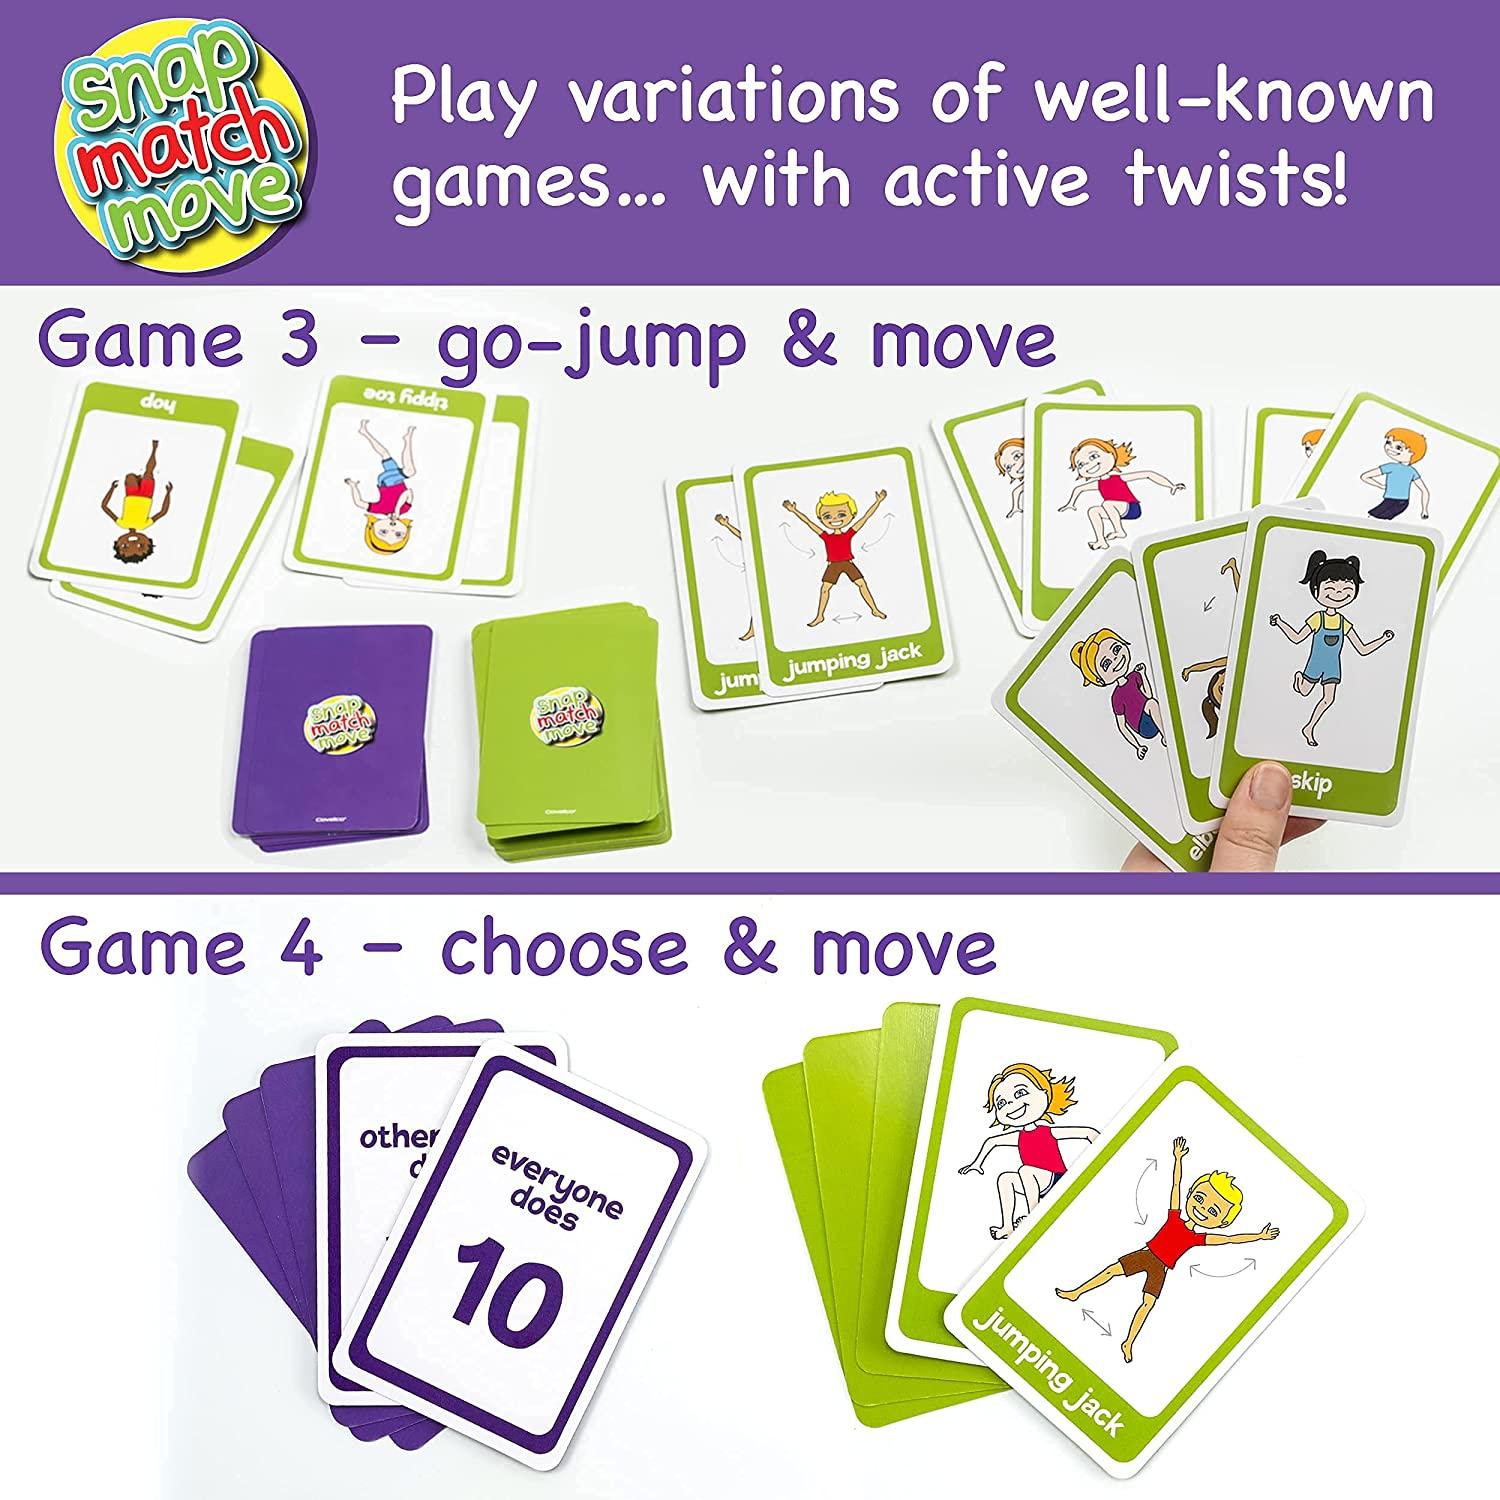 Covelico Kids Workout Equipment - Fun Exercise Cards to Play Kids Exercise  Games, Kids Exercise Equipment & Physical Education Equipment - PE Cards 